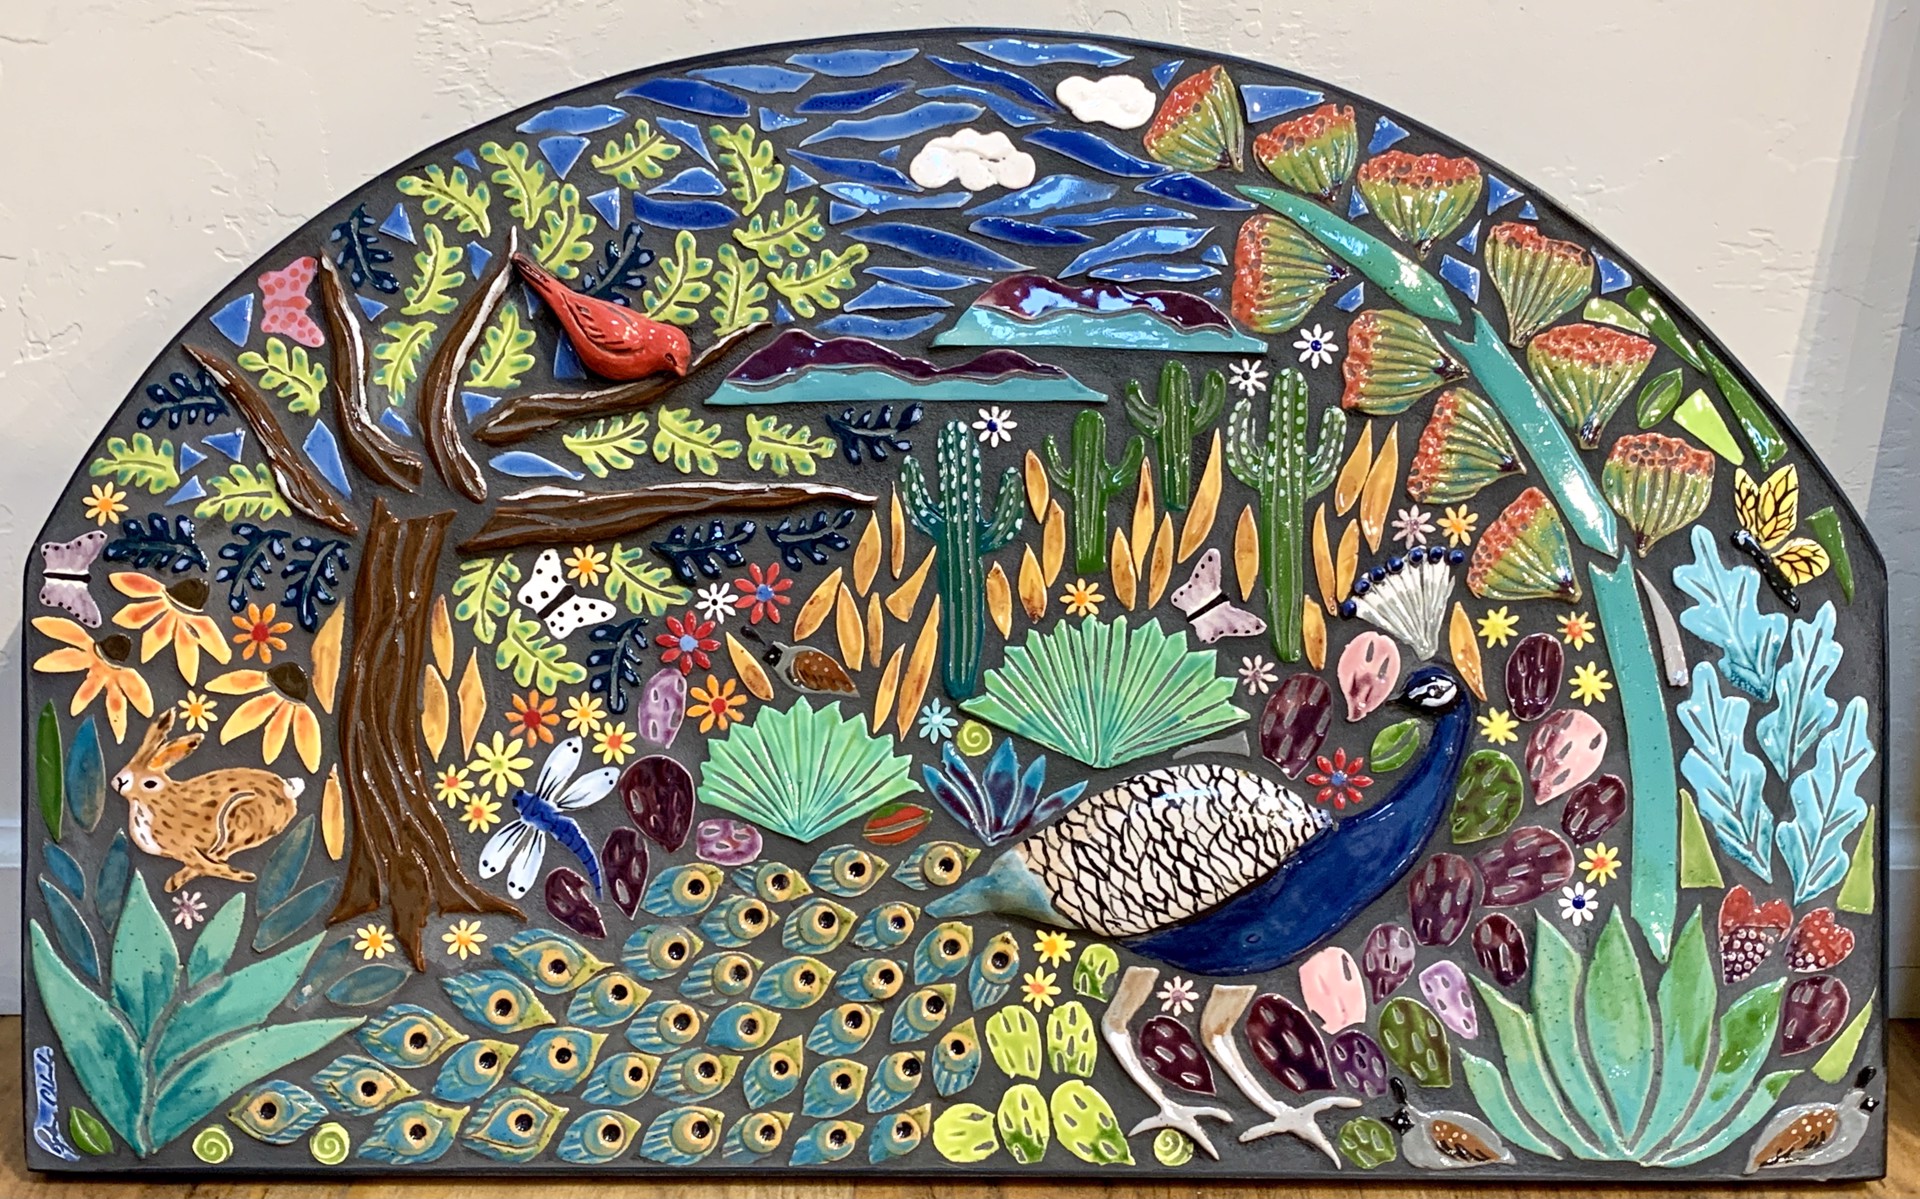 "Peacock in the Garden" 3-D Sculptural Arch Mosaic by Robin Chlad